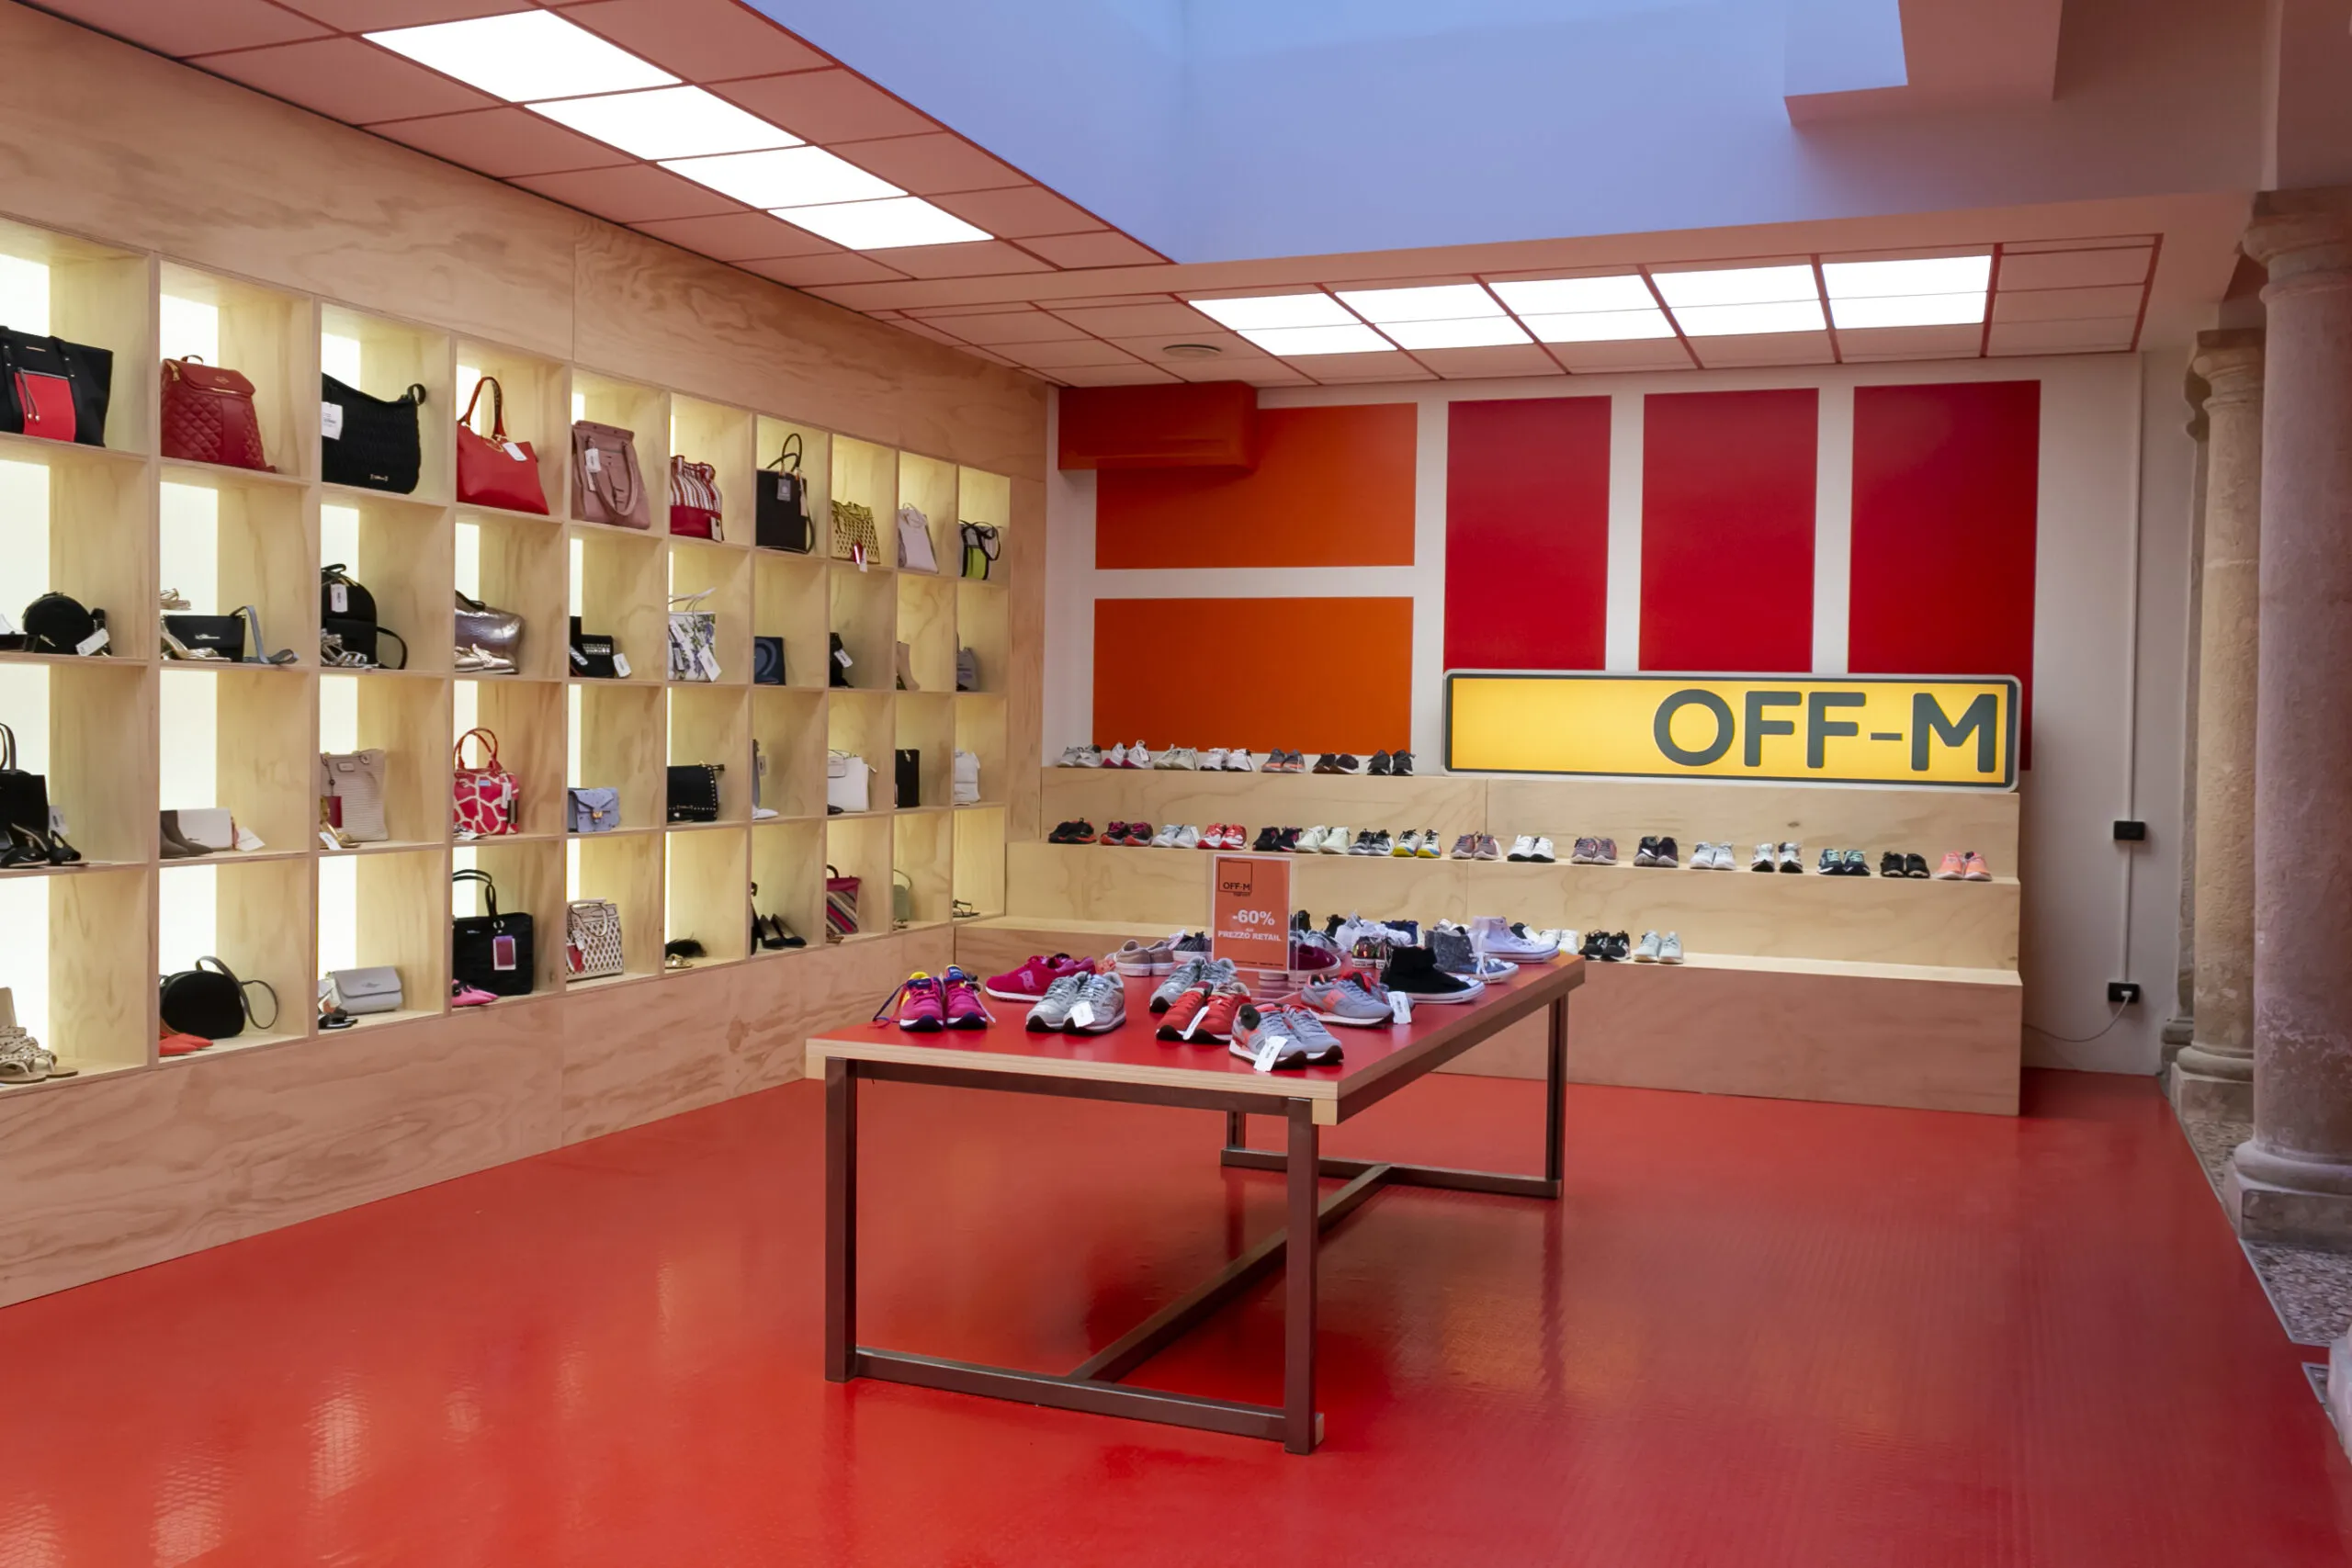 Off-Market in Italy, europe | Shoes,Accessories,Clothes - Country Helper